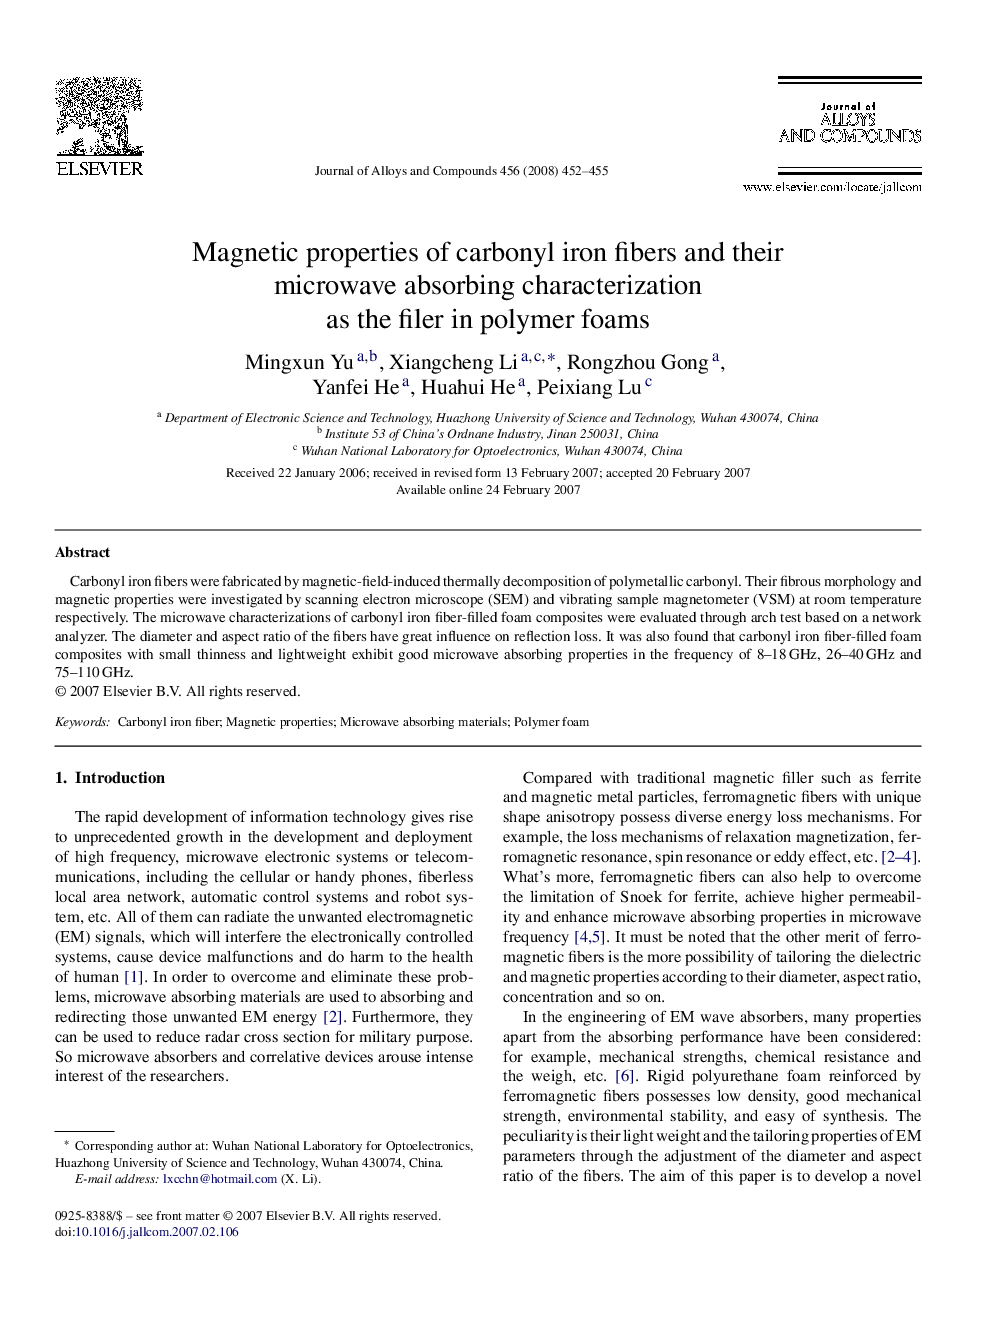 Magnetic properties of carbonyl iron fibers and their microwave absorbing characterization as the filer in polymer foams